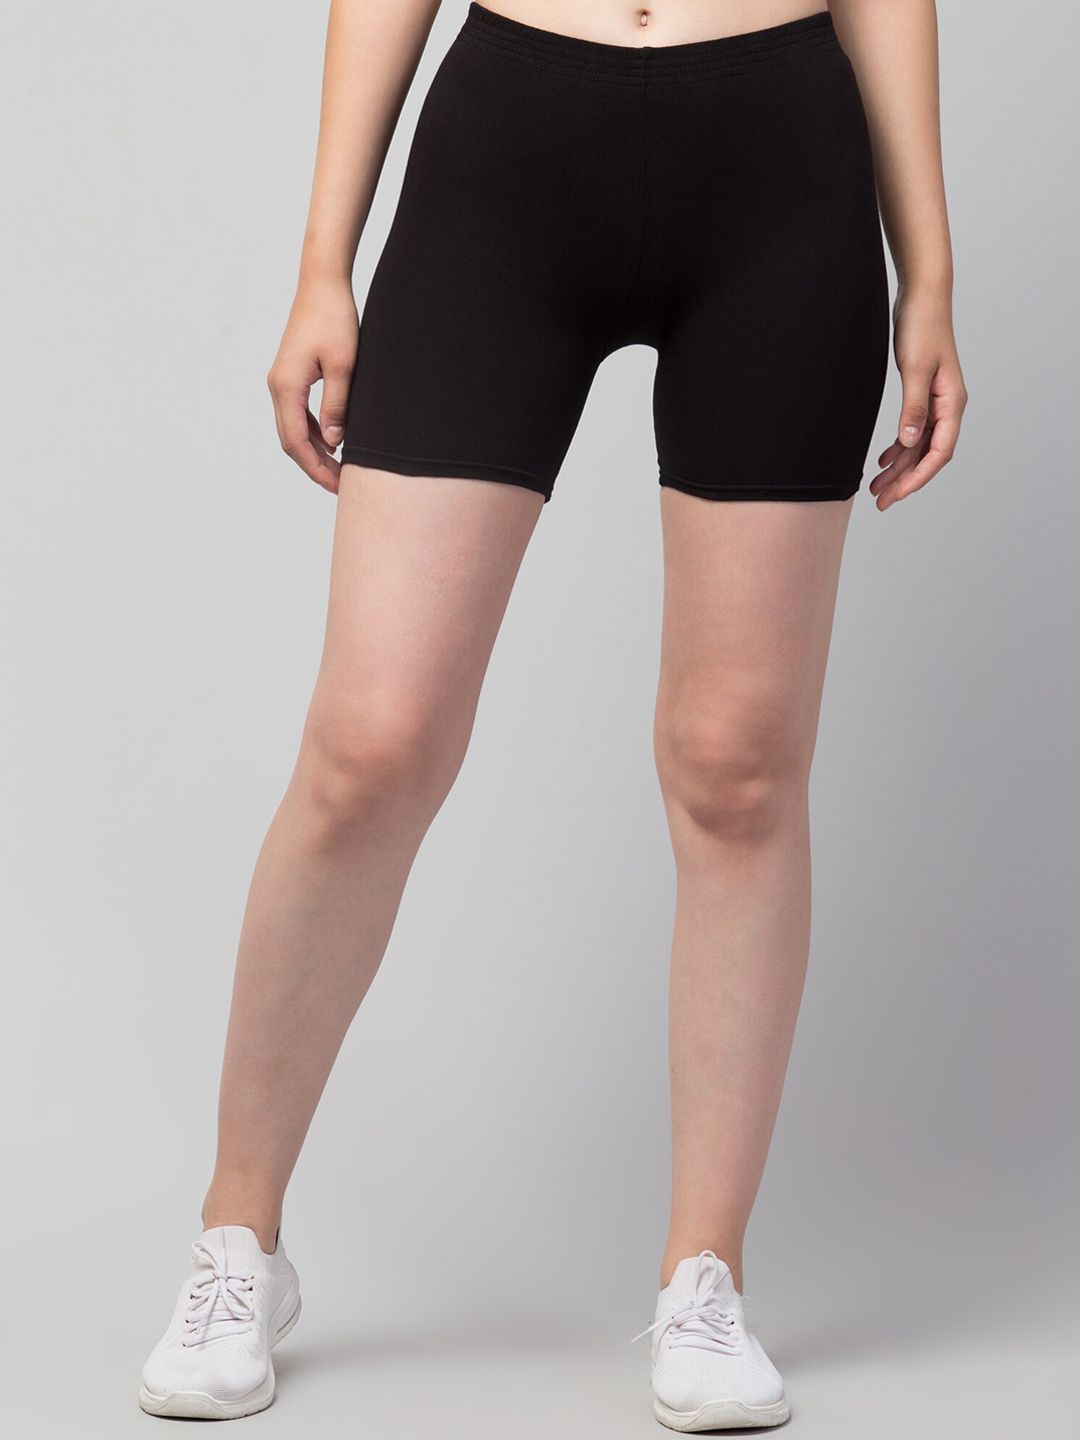 Apraa & Parma Women Black Solid Cotton Skinny Fit Cycling Sports Shorts Price in India